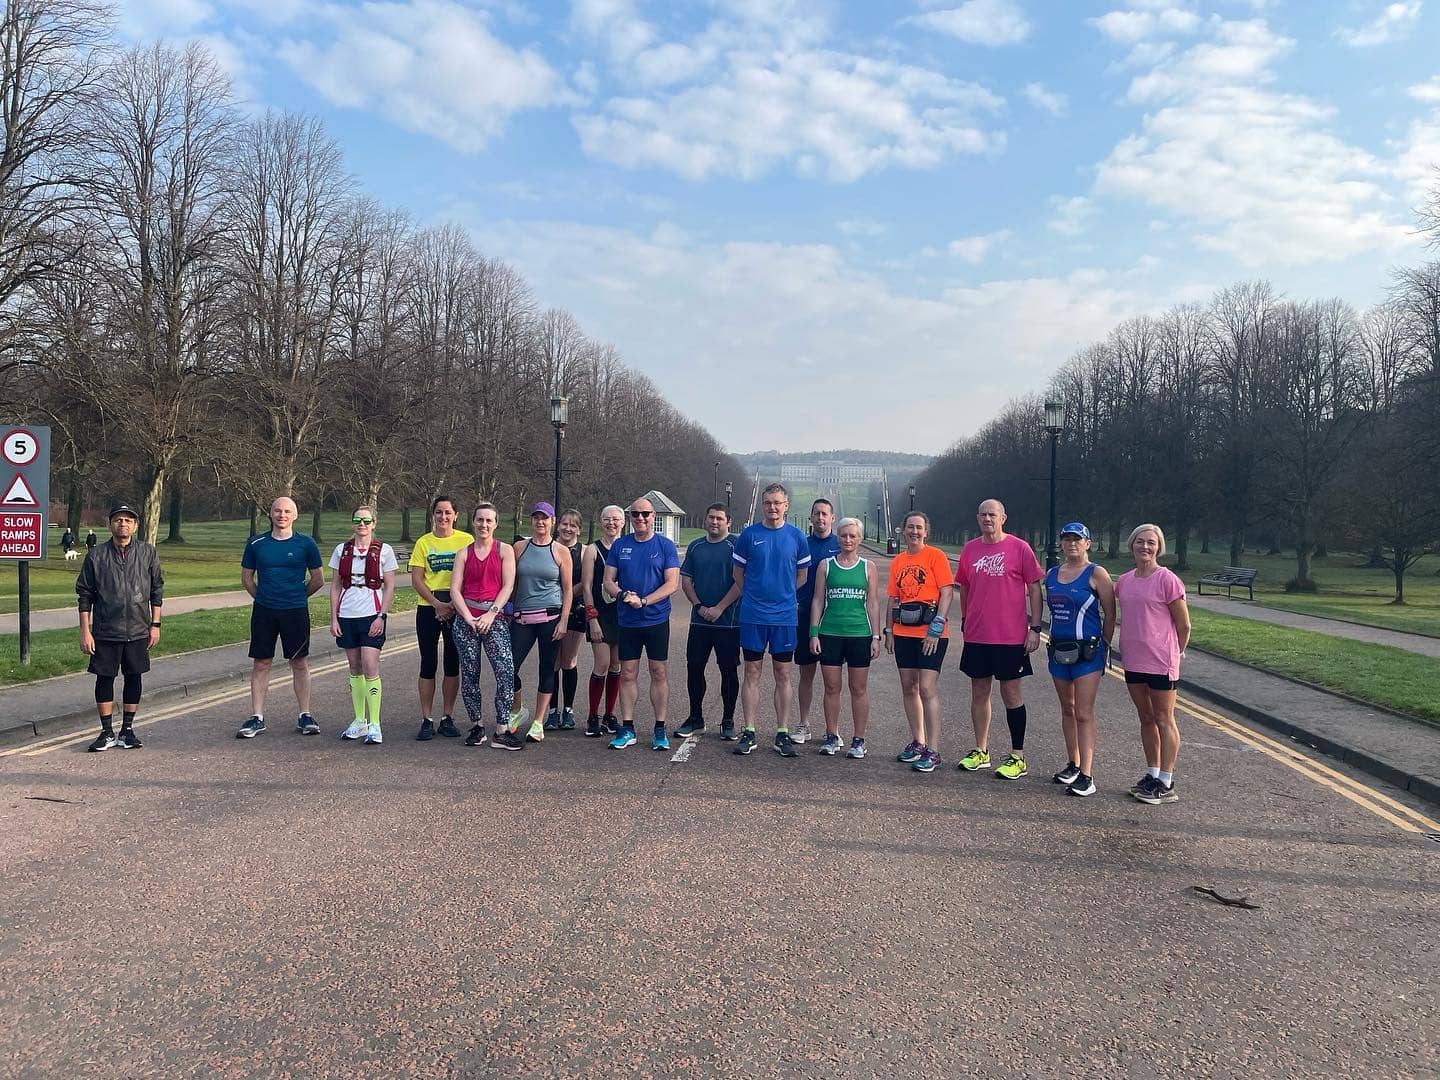 Introducing our pacers for the 2022 Mash Direct Belfast City Half Marathon